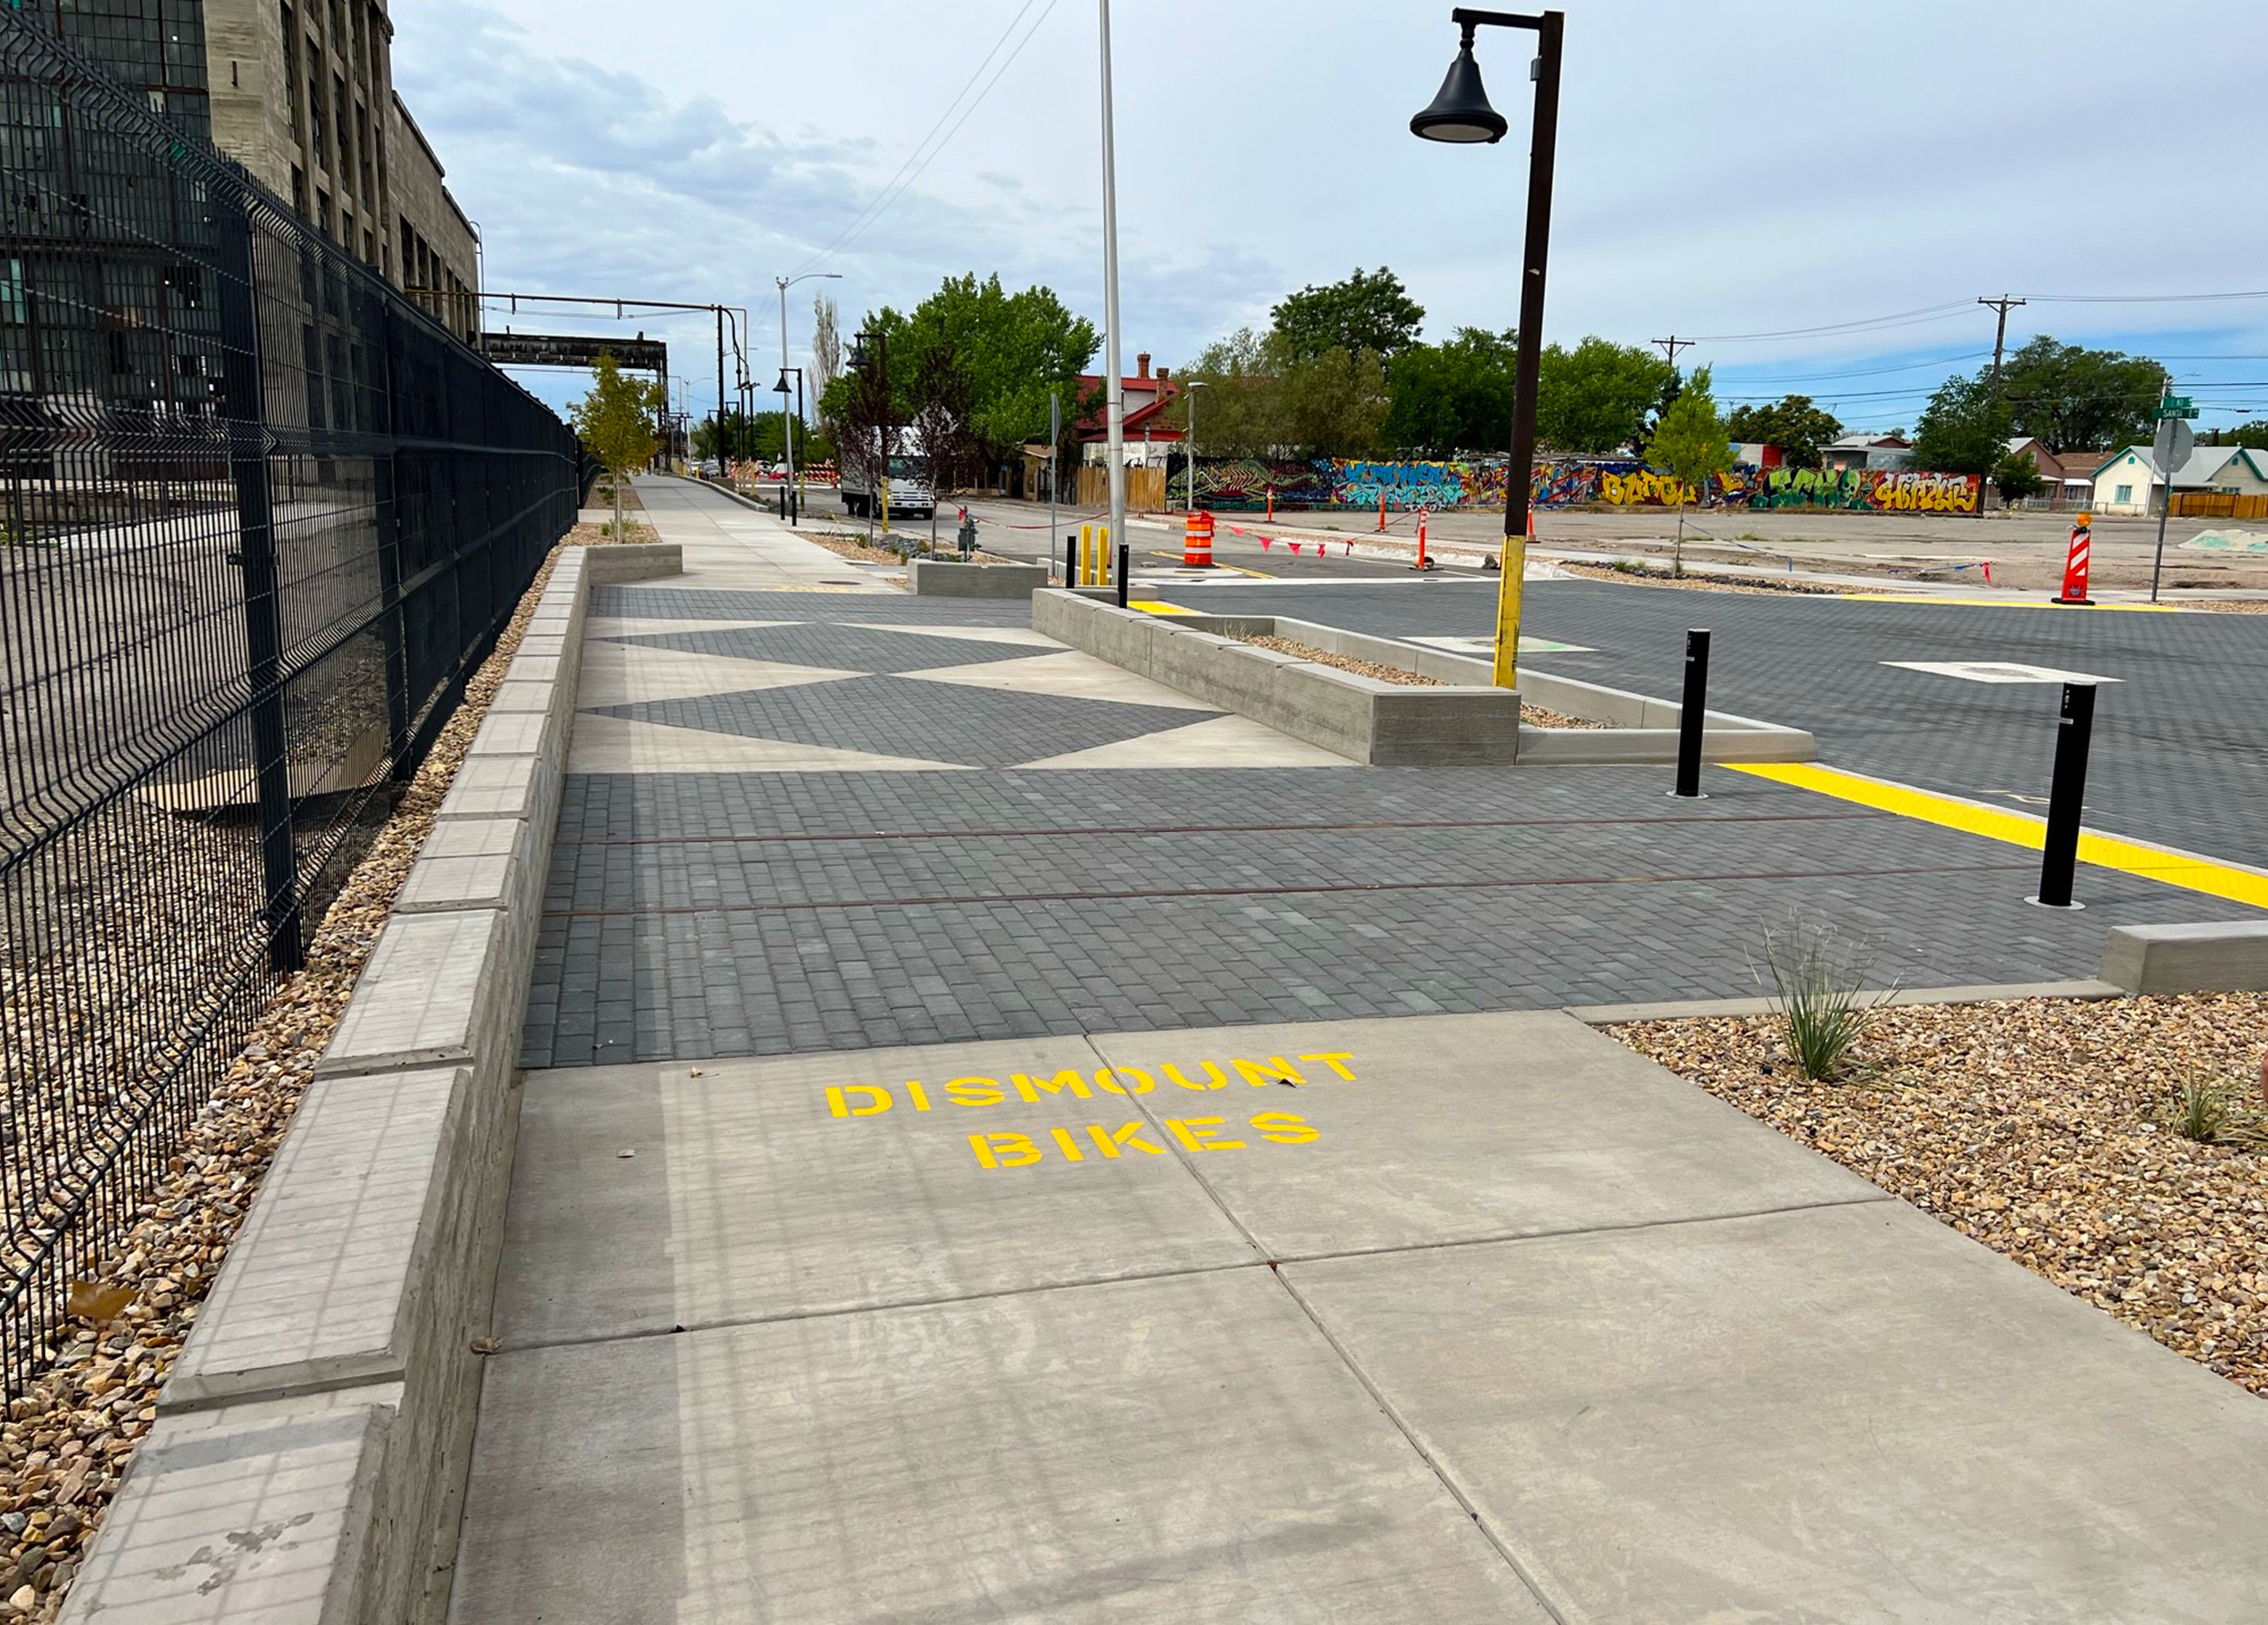 The Albuquerque Rail Trail project was awarded the total funding request amount of $11,466,938.